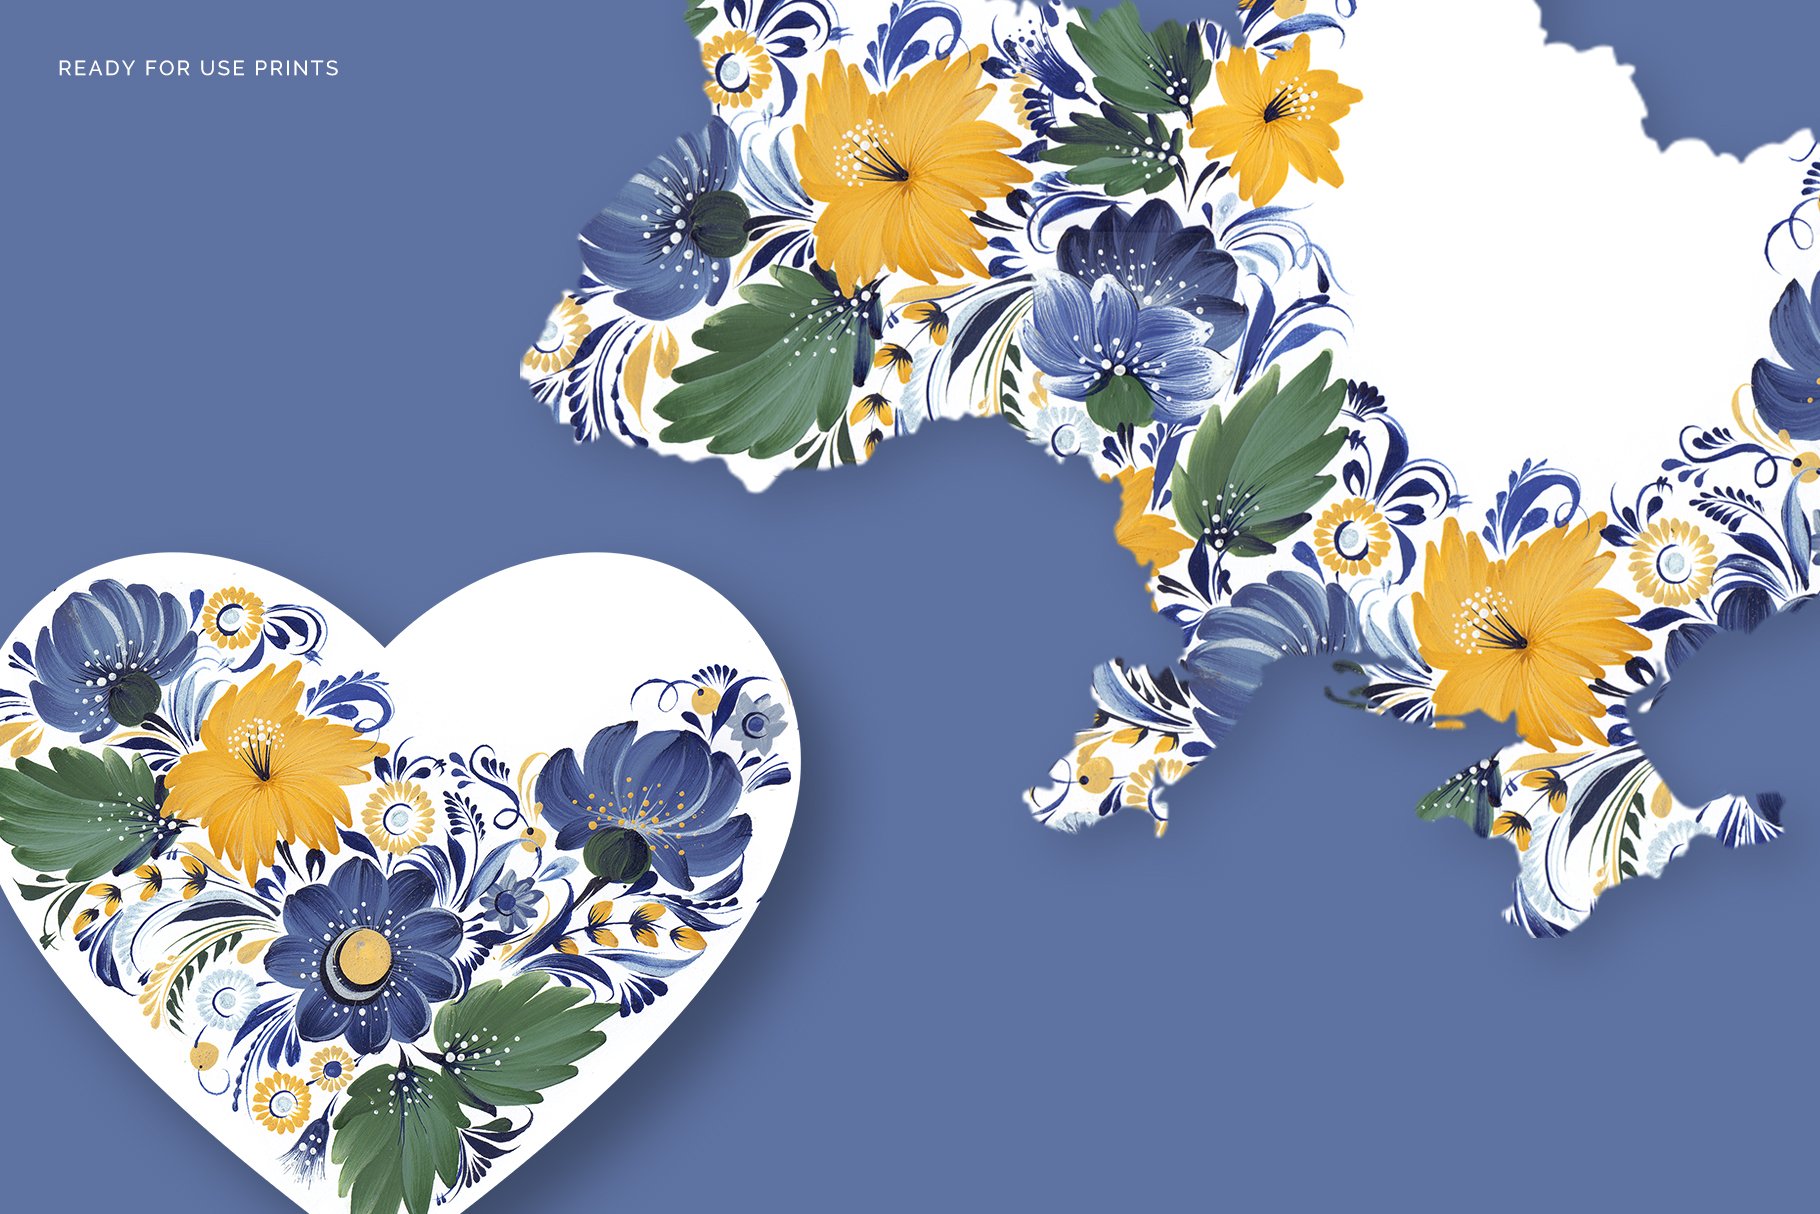 Ukraine support flowers preview image.